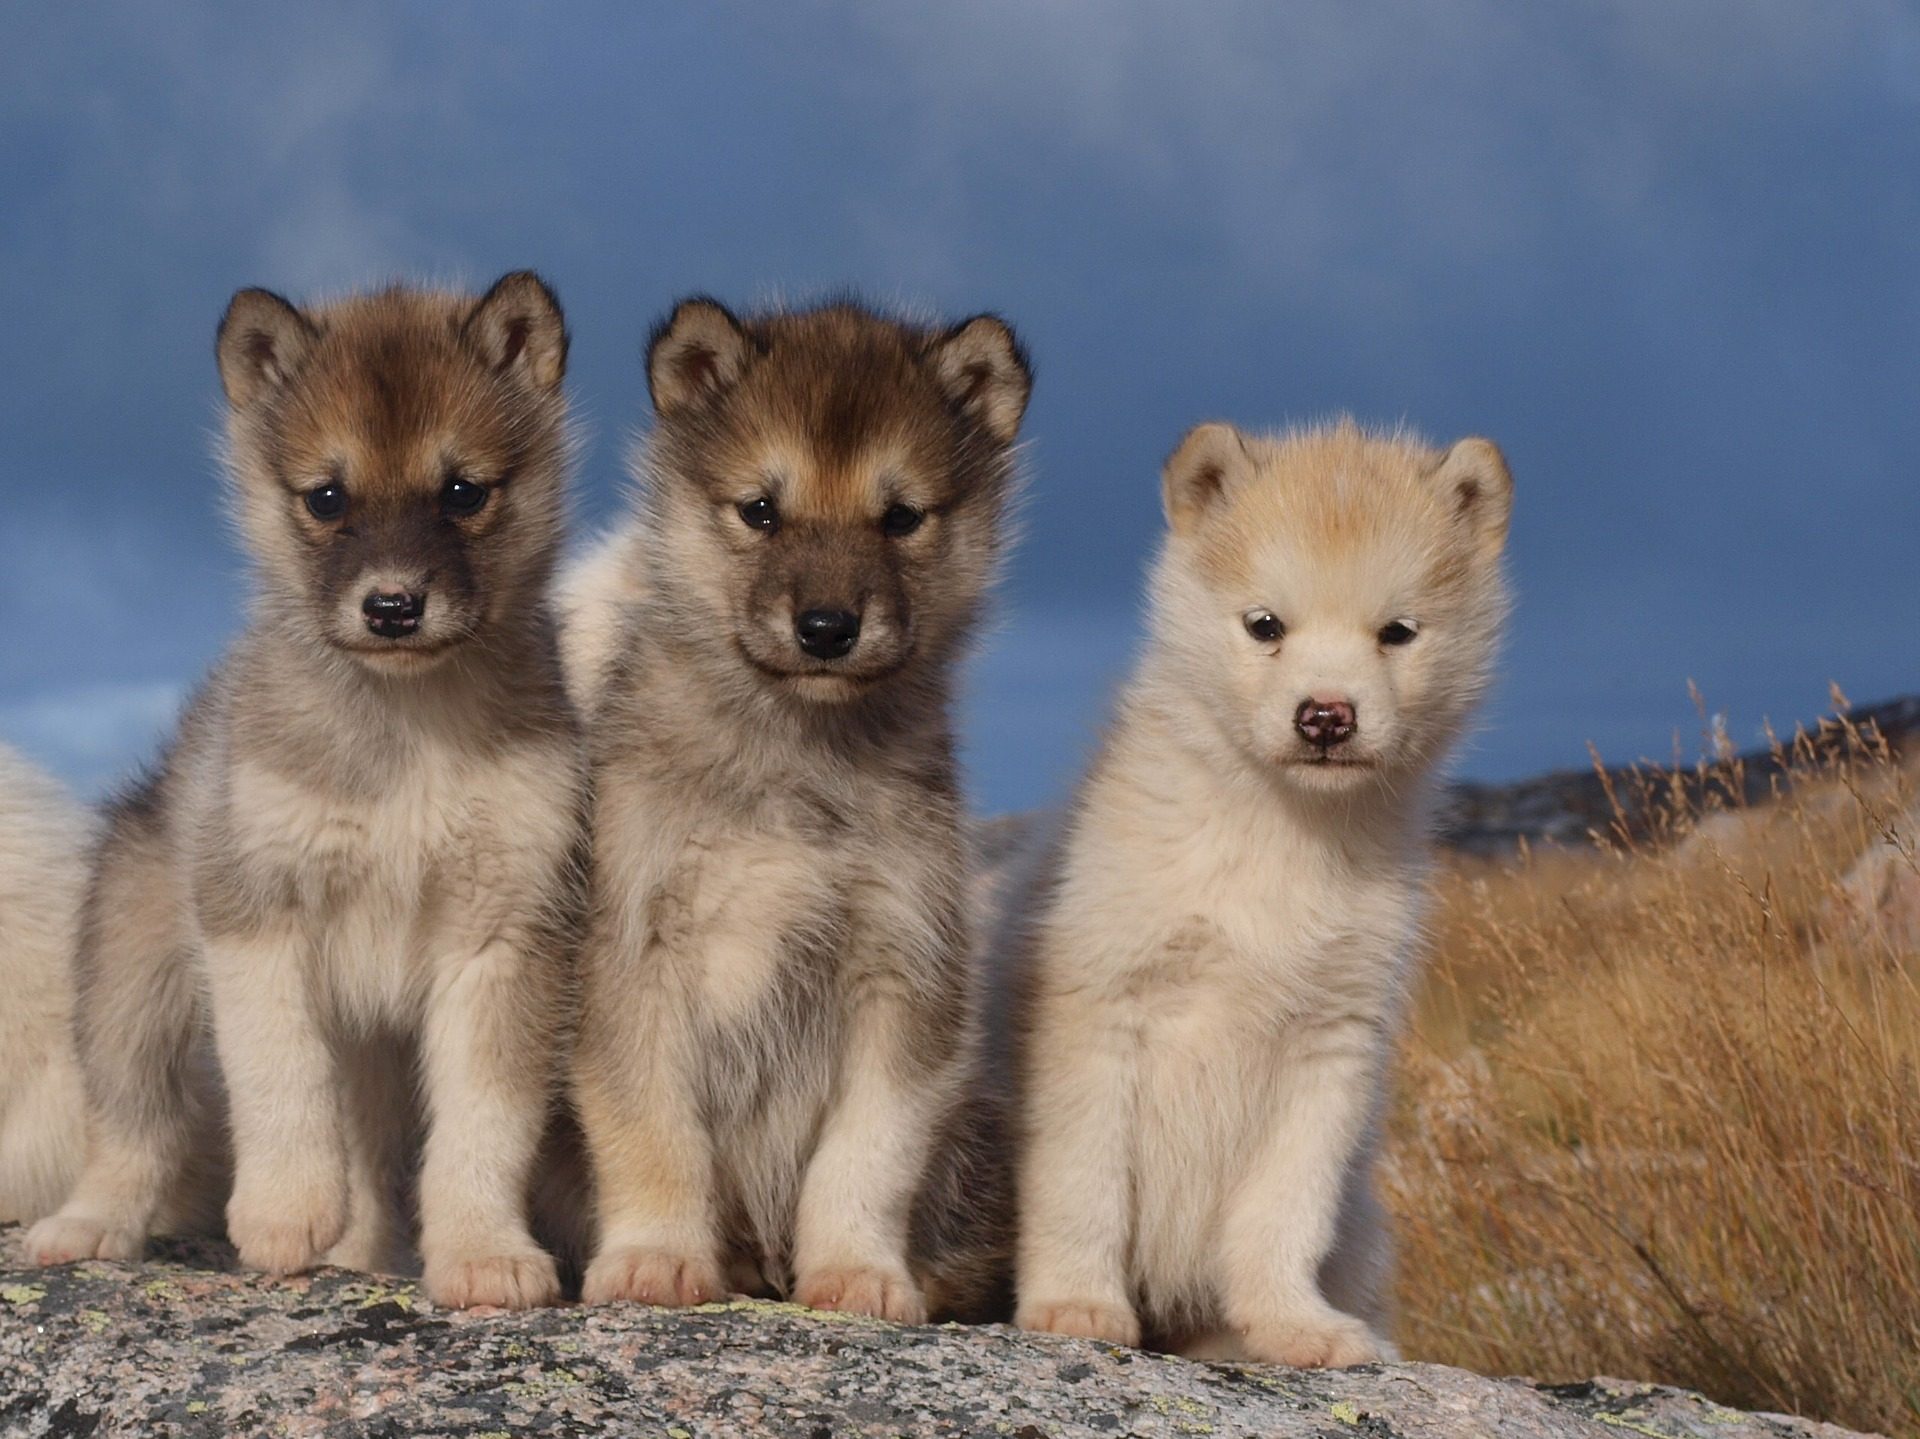 Three Cute Baby Sled Dogs Wallpaper In High Quality - Greenland Dogs - HD Wallpaper 